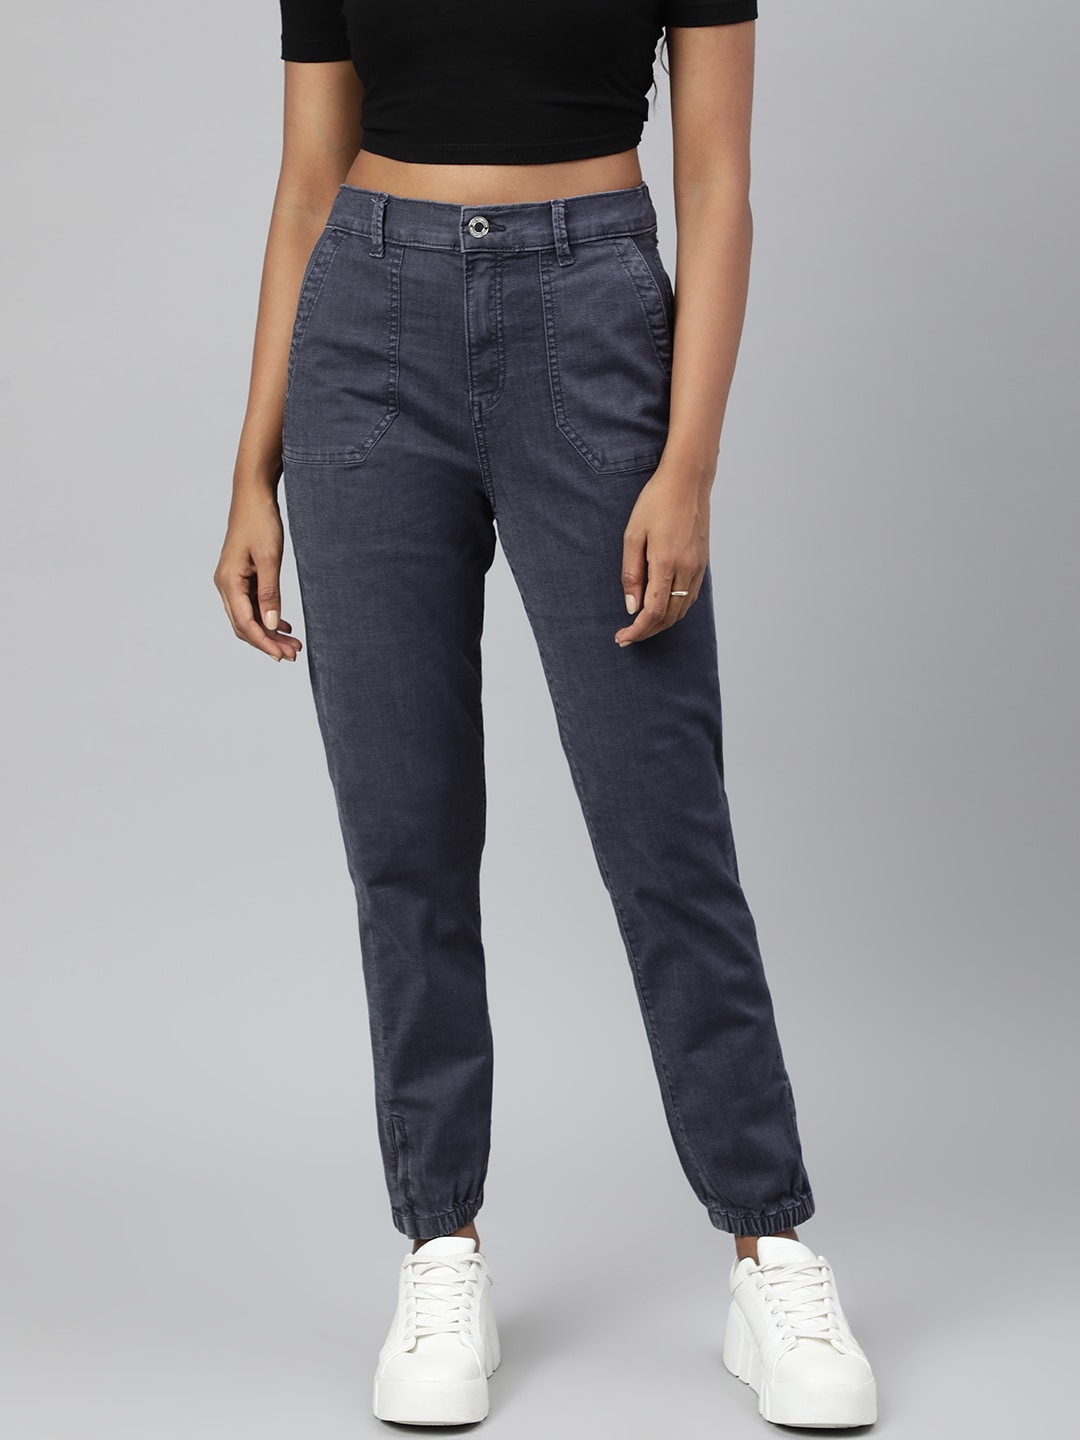 Marks & Spencer Women Blue Stretchable Joggers Price in India